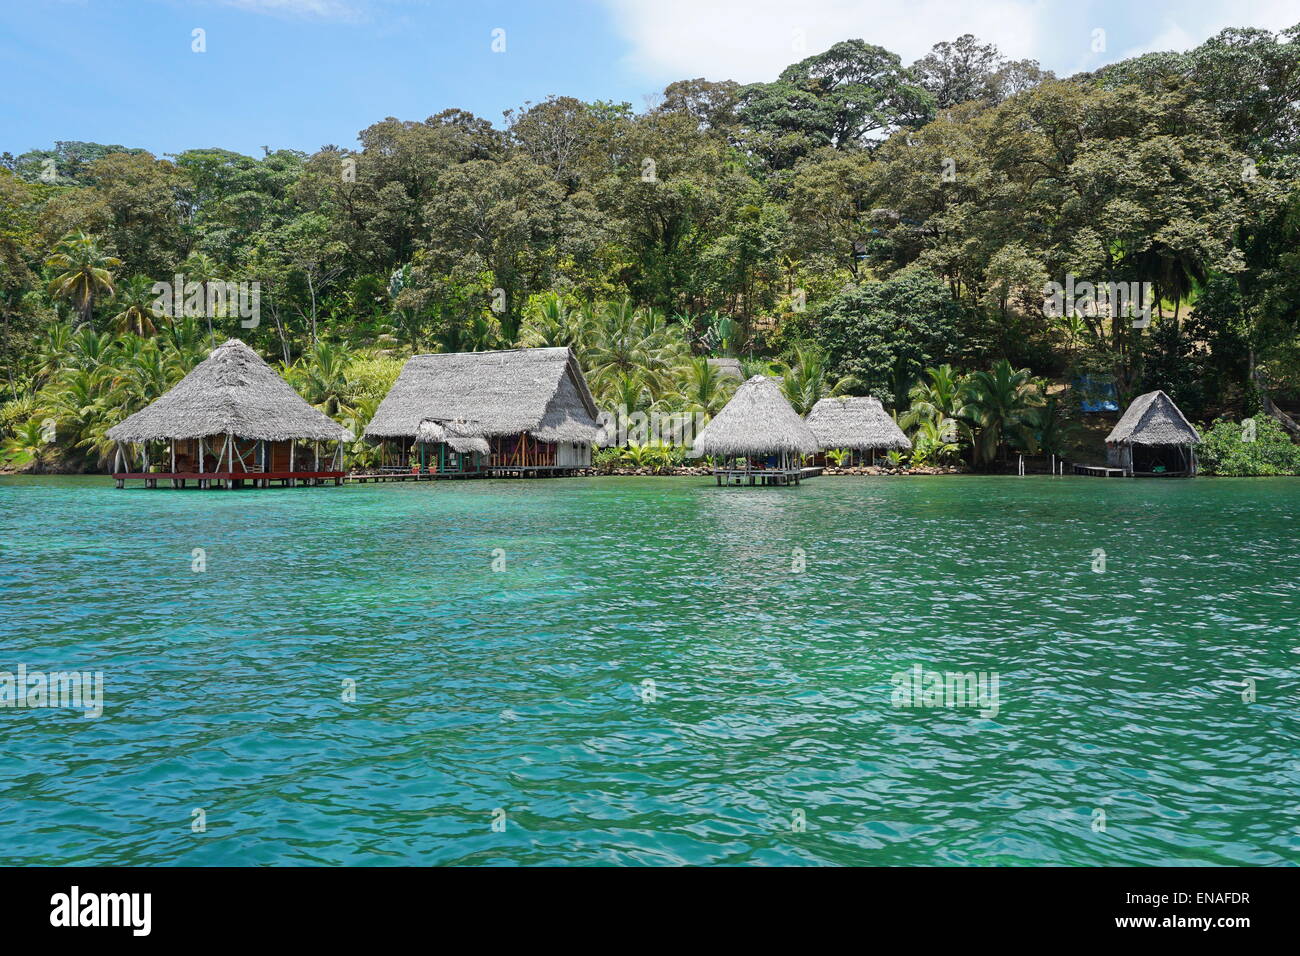 Tropical eco lodge with thatch huts over the sea and lush vegetation, Caribbean shore of Panama, Central America Stock Photo